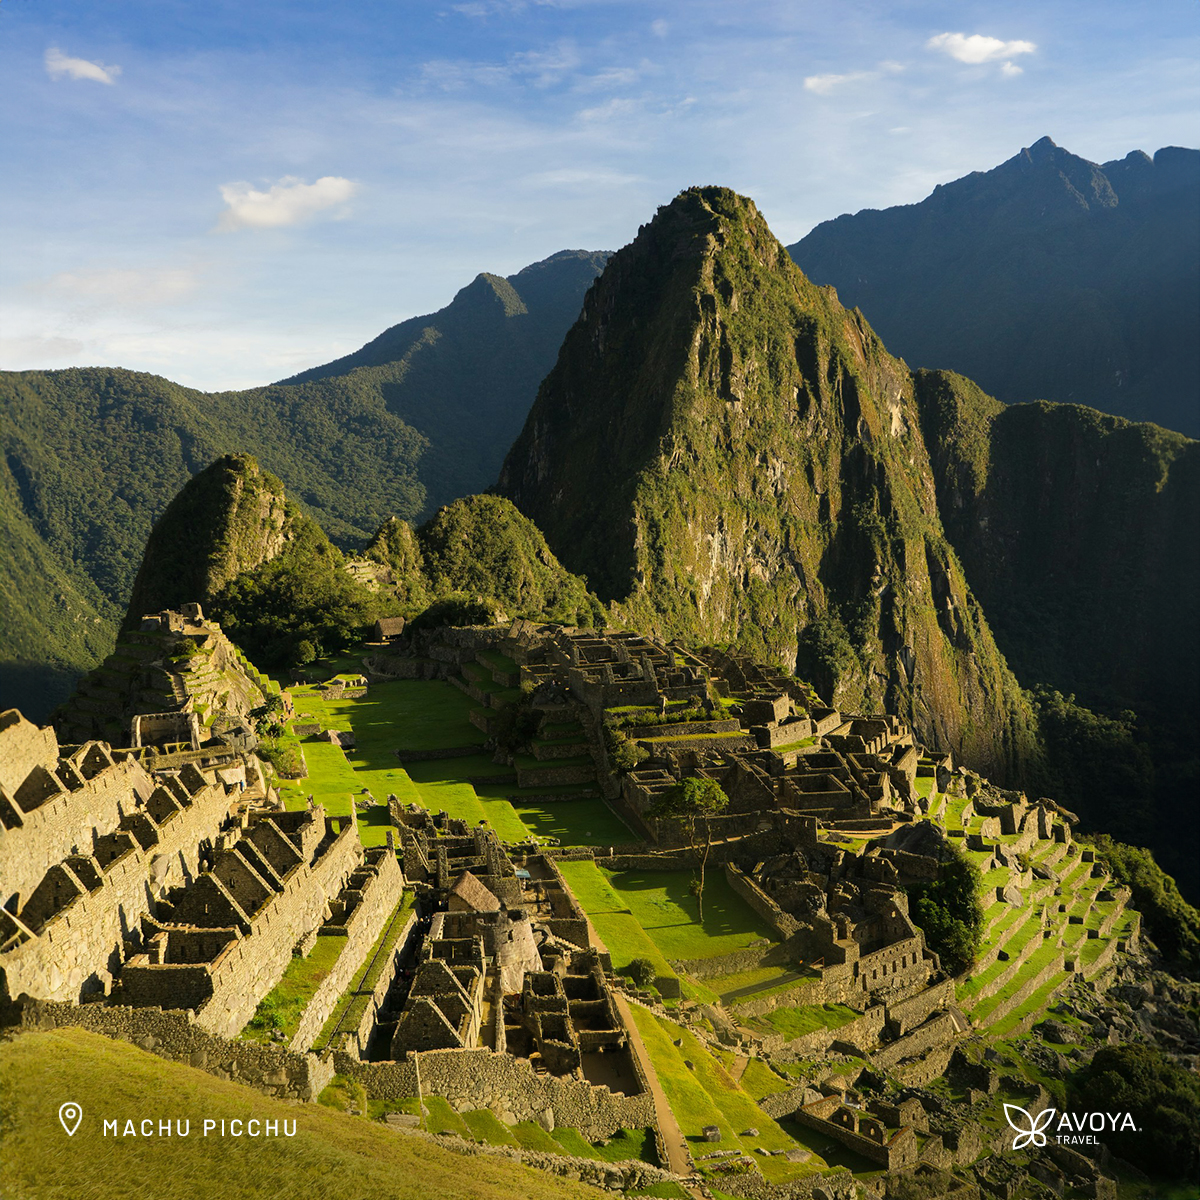 Can you #SpotTheDifference between these images of #MachuPicchu? Drop your answer as a reply! Explore the rich heritage of #Peru and check out this #UNESCOWorldHeritageSite where history collides with modern-day marvels on your next trip to #SouthAmerica!